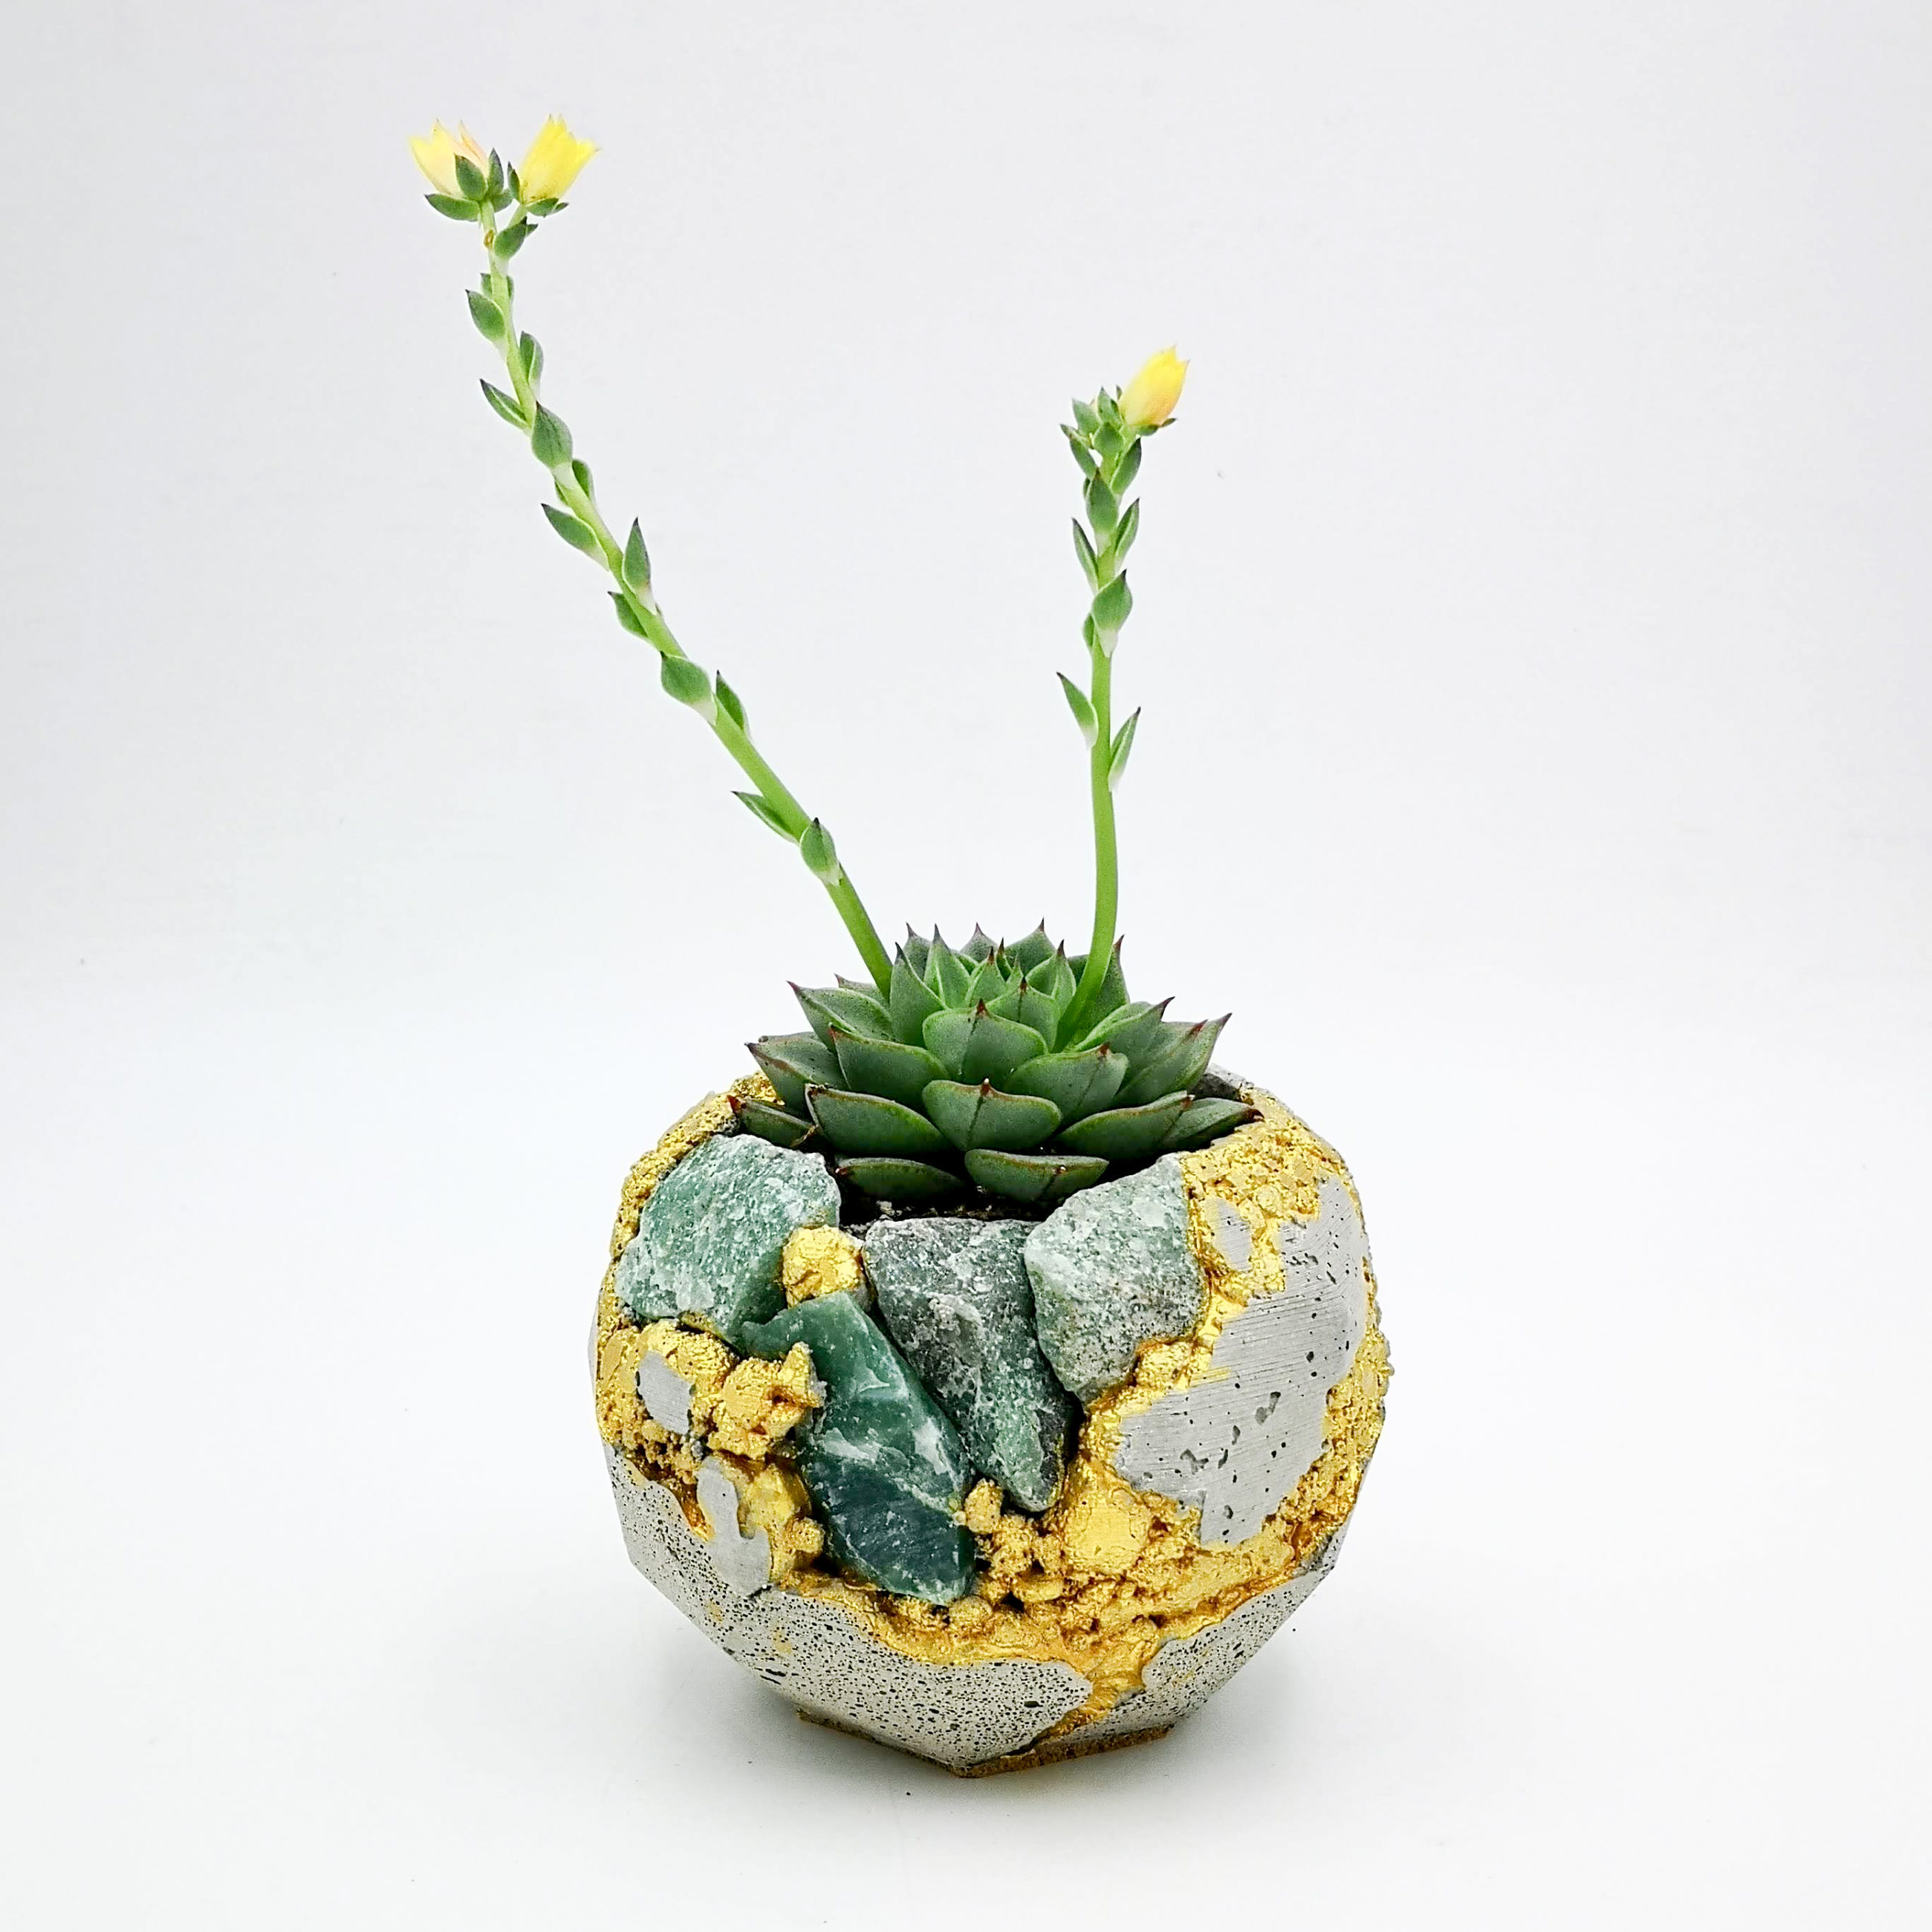 Planter Pot Roma Via Piergaro kintsugi, grey color with mineral stones and gold structure, octogonal shape handmade in Berlin by Kula.